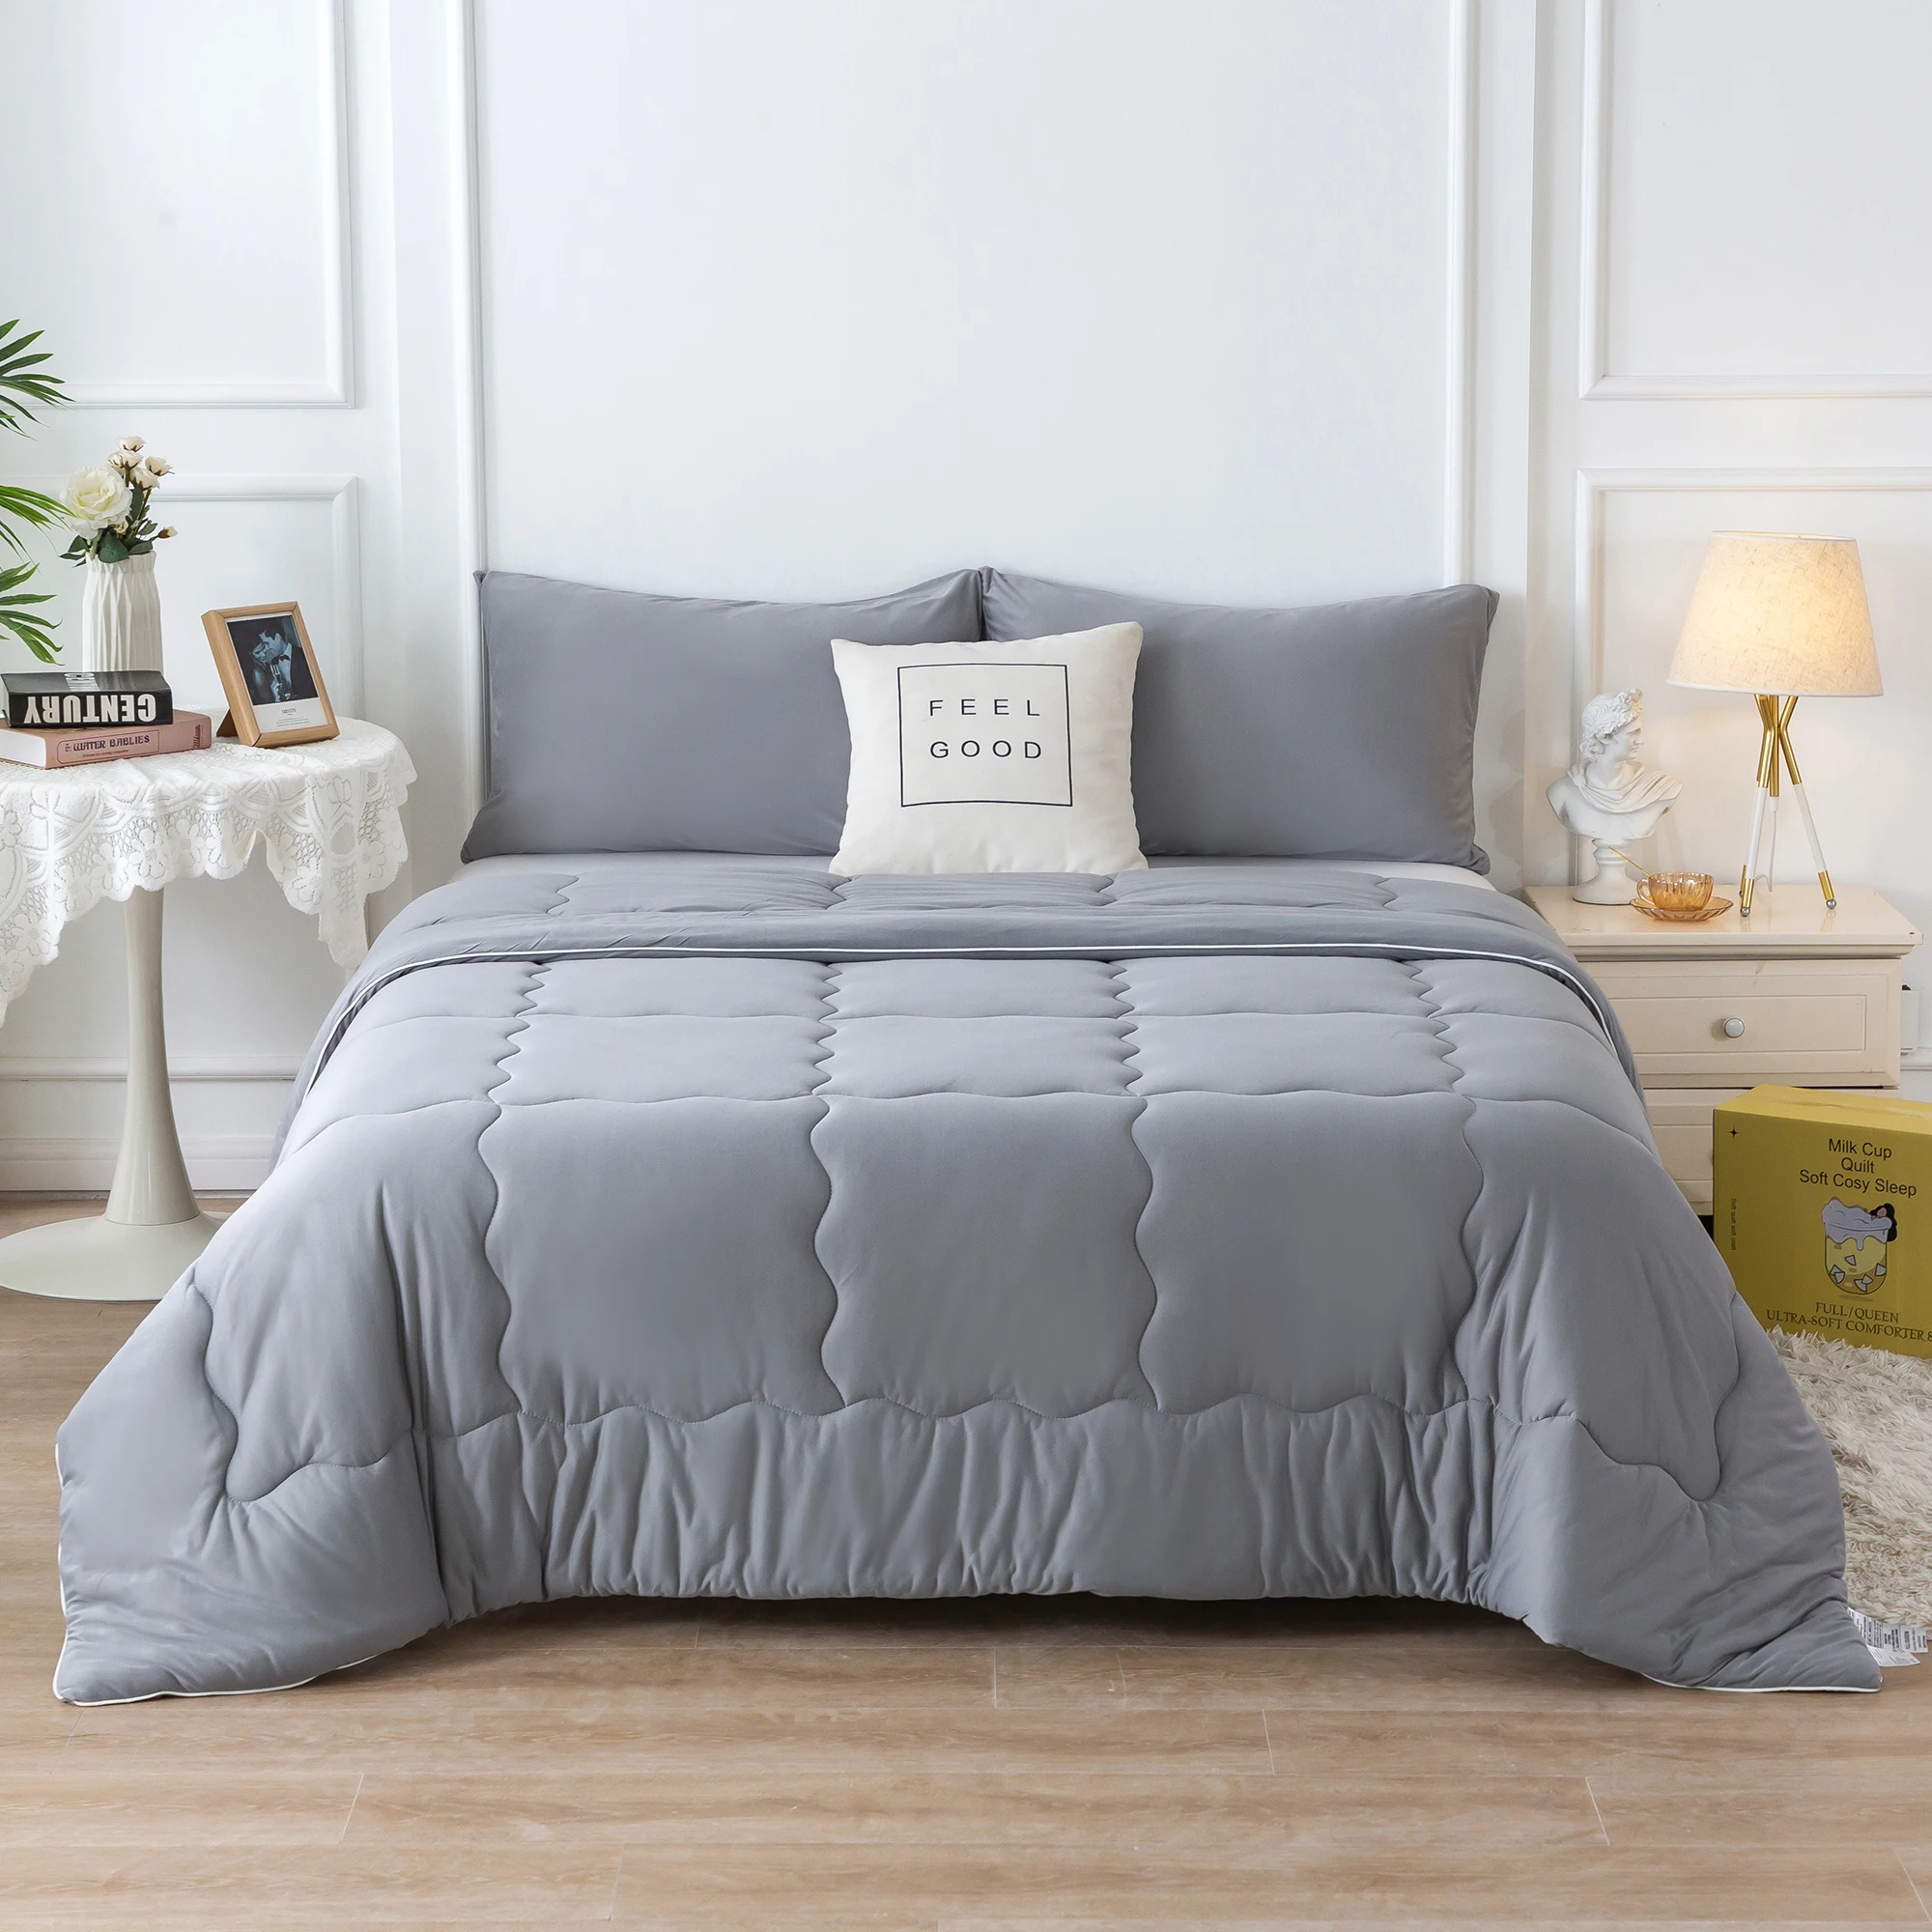 

Reversible Ultra-Soft Comforter Set Twin Size Jersey Knit Cotton Bedding 1 Down with 2 Pillowcase for All Season Use